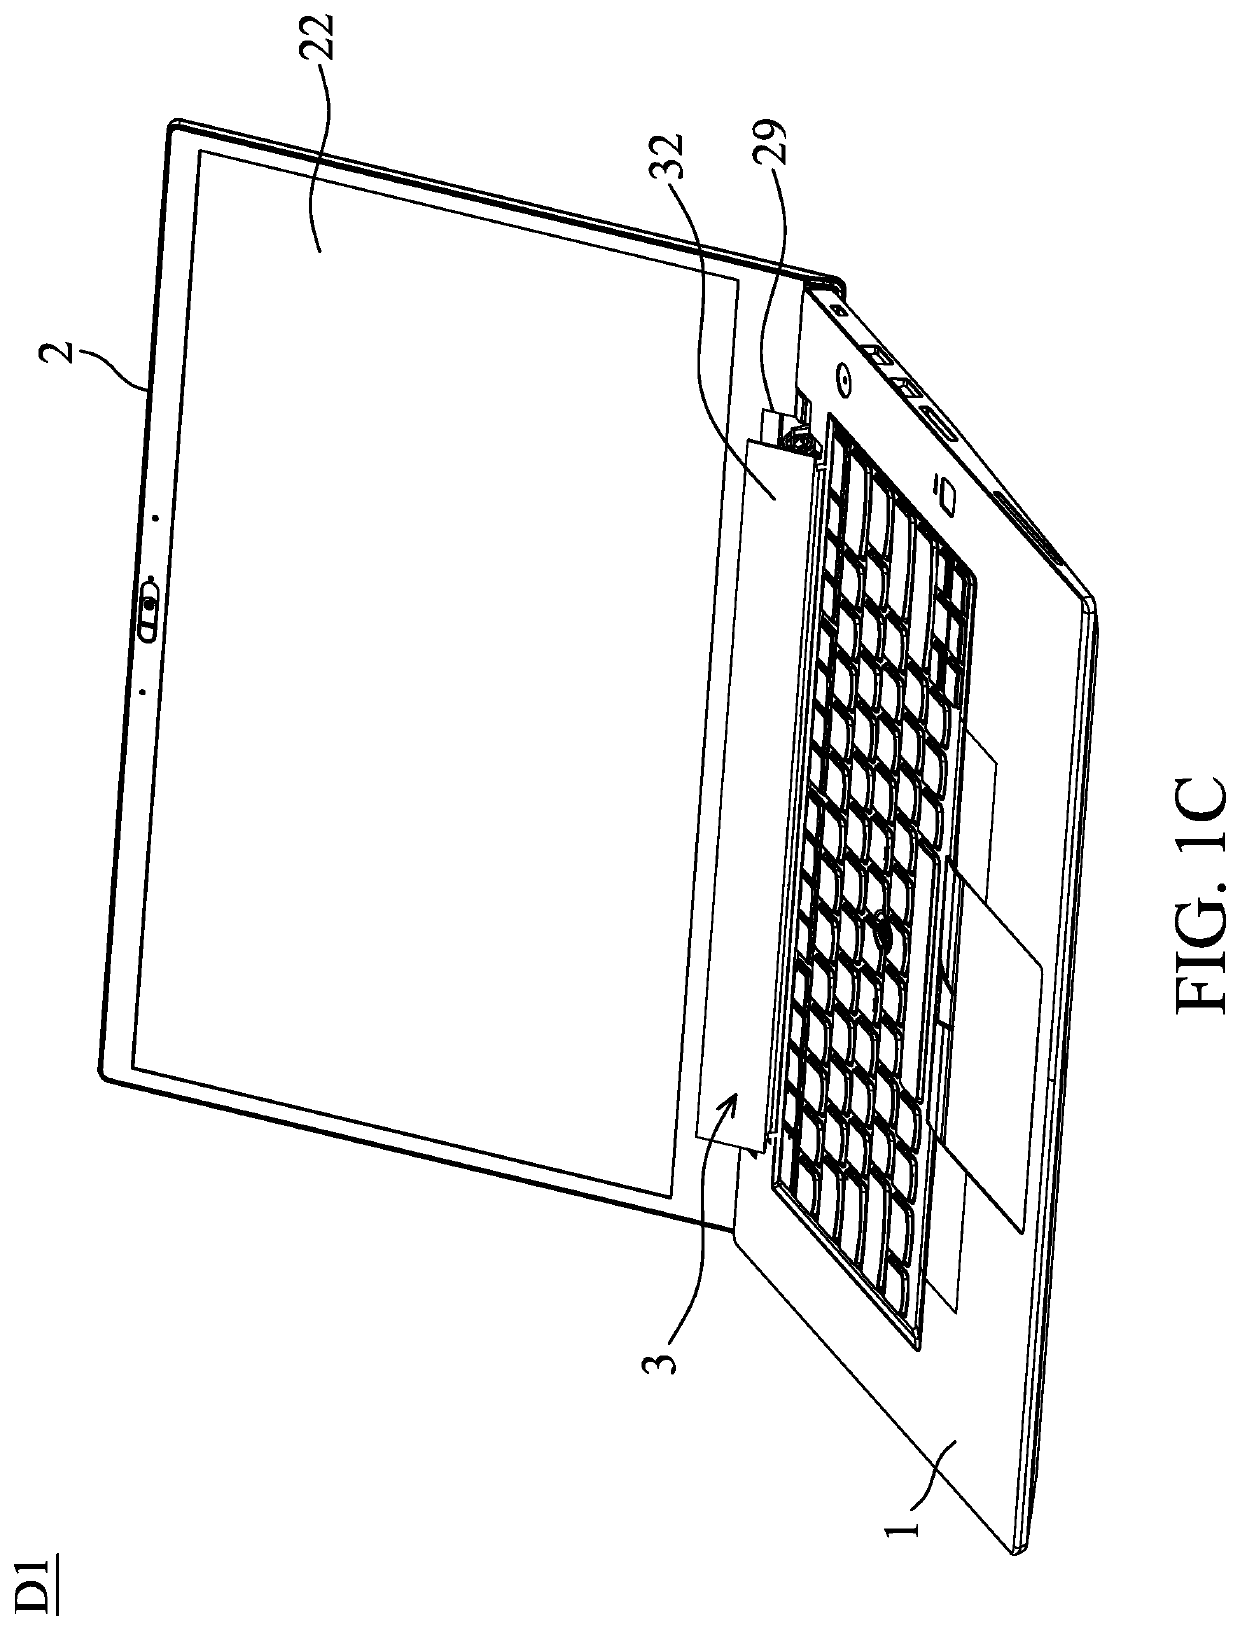 Clamshell electronic device